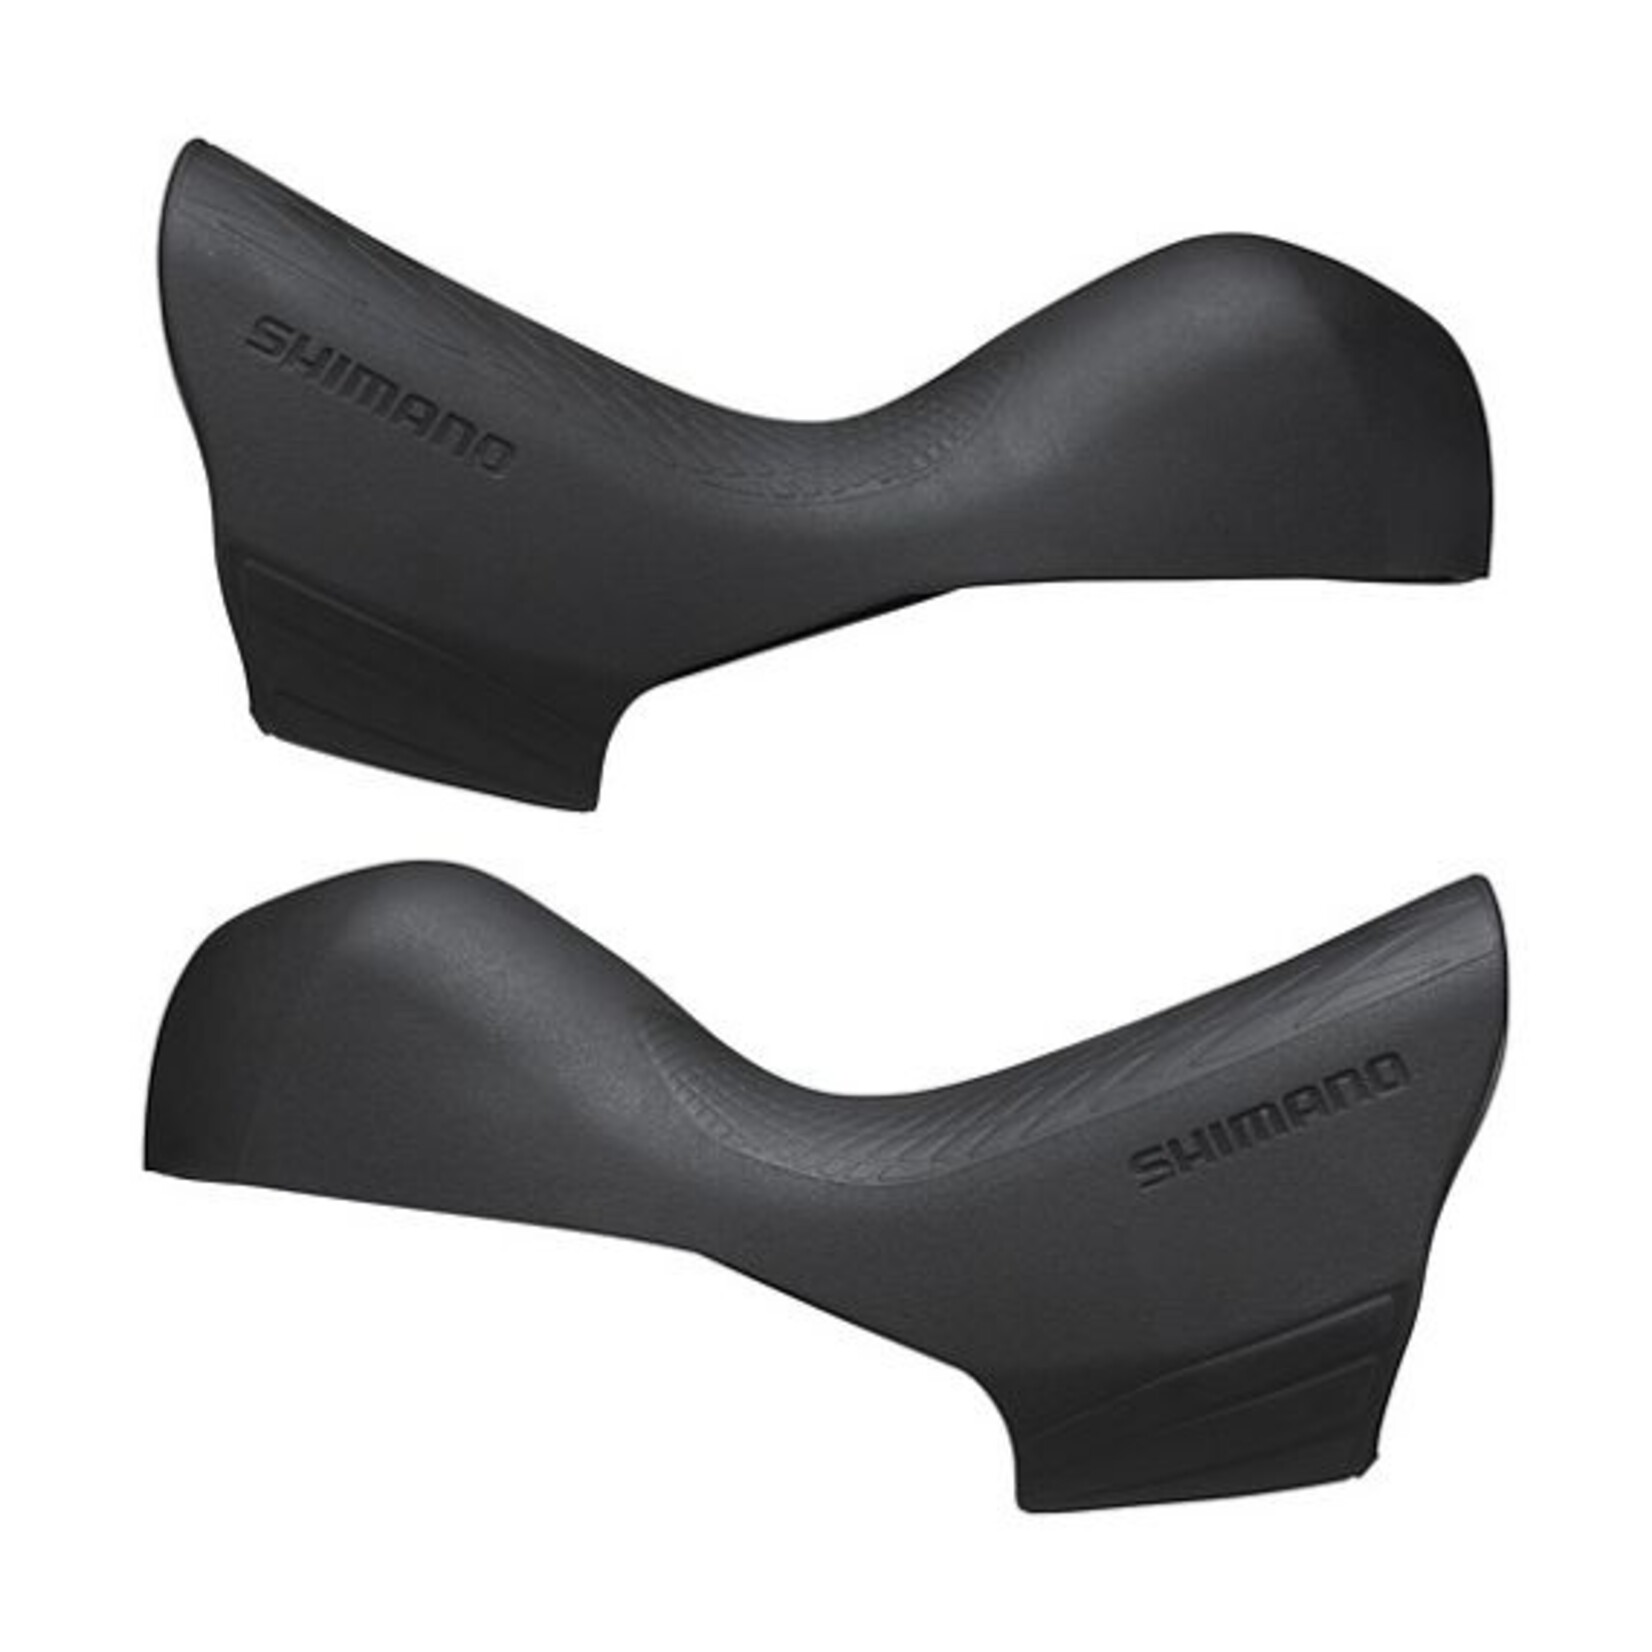 SHIMANO ST-7020 SHIFTER HOODS / COVERS